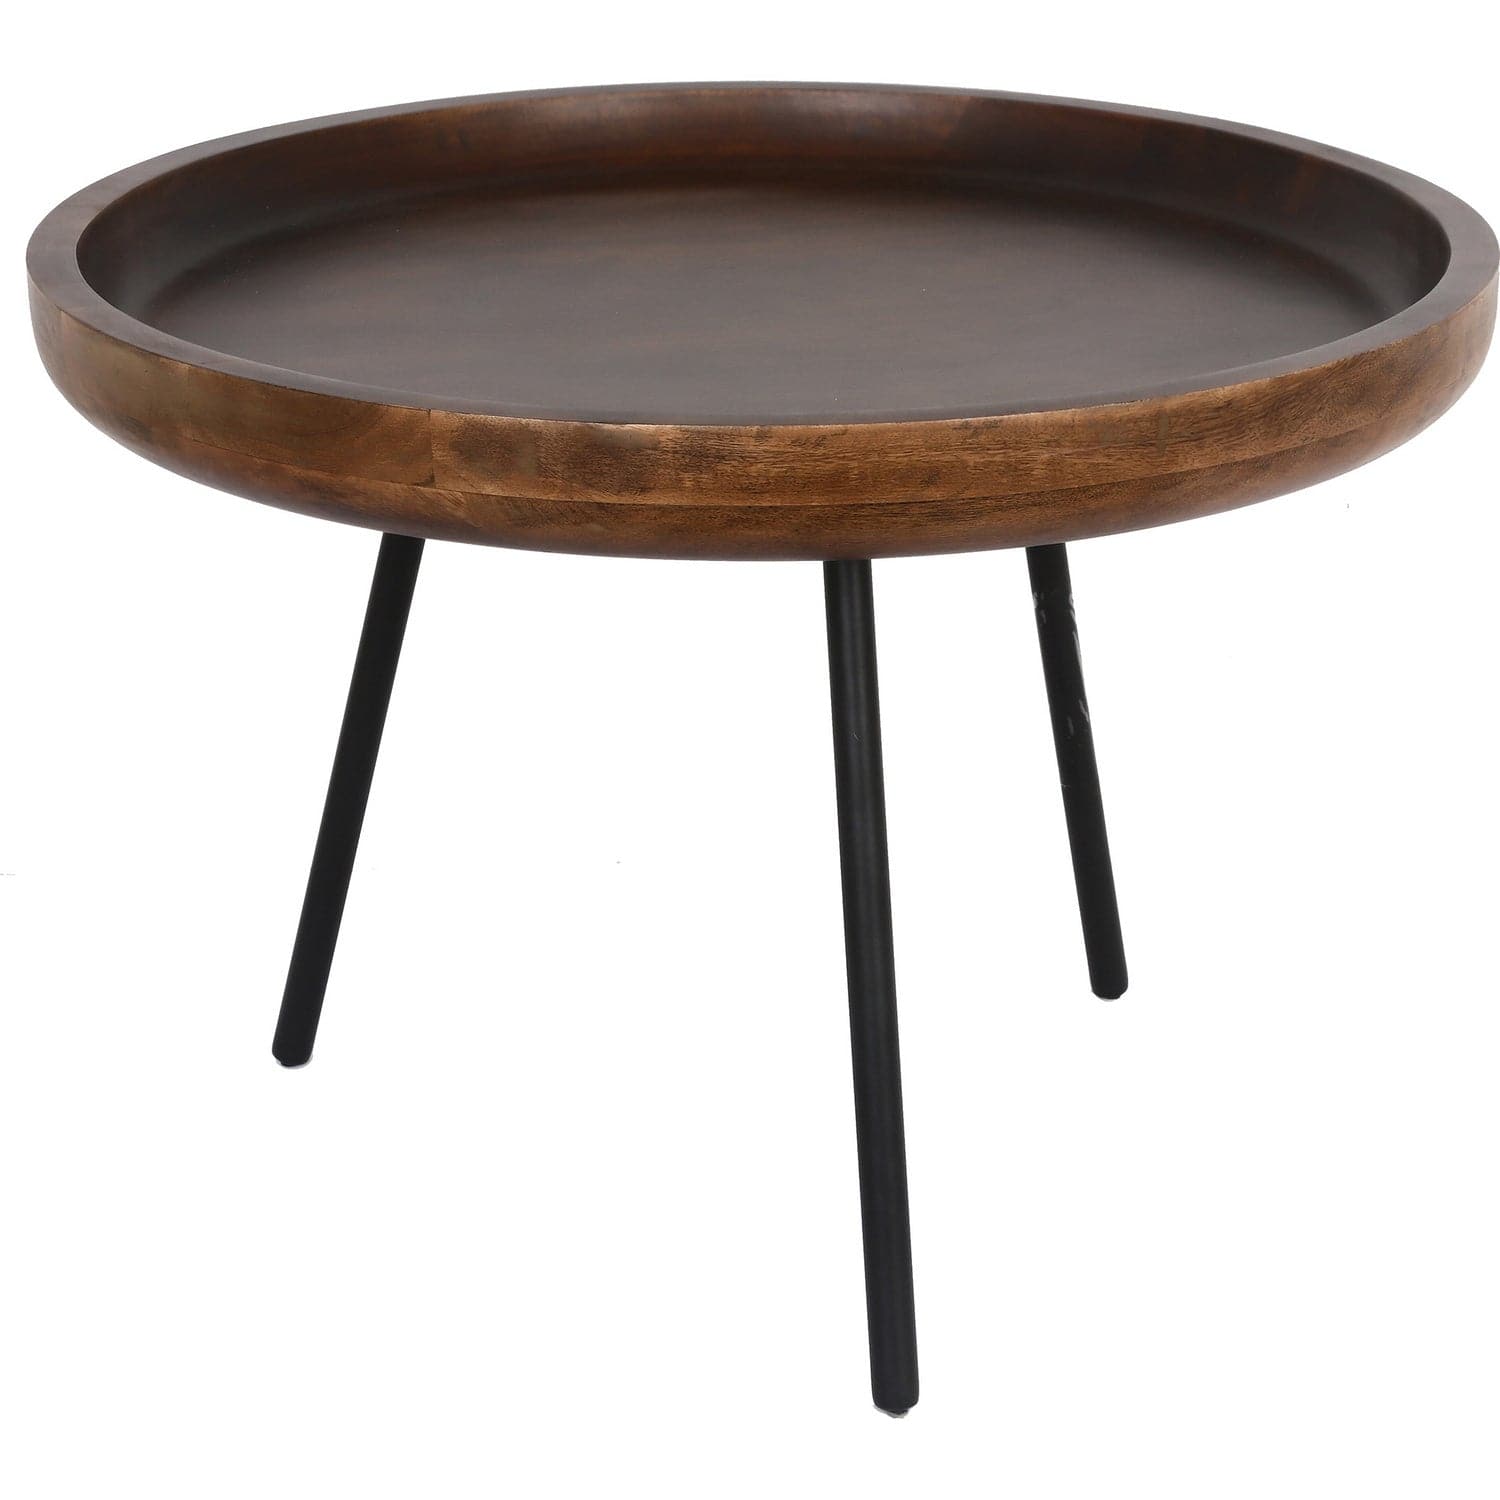 Renwil - TA396 - Furniture - Cocktail Tables